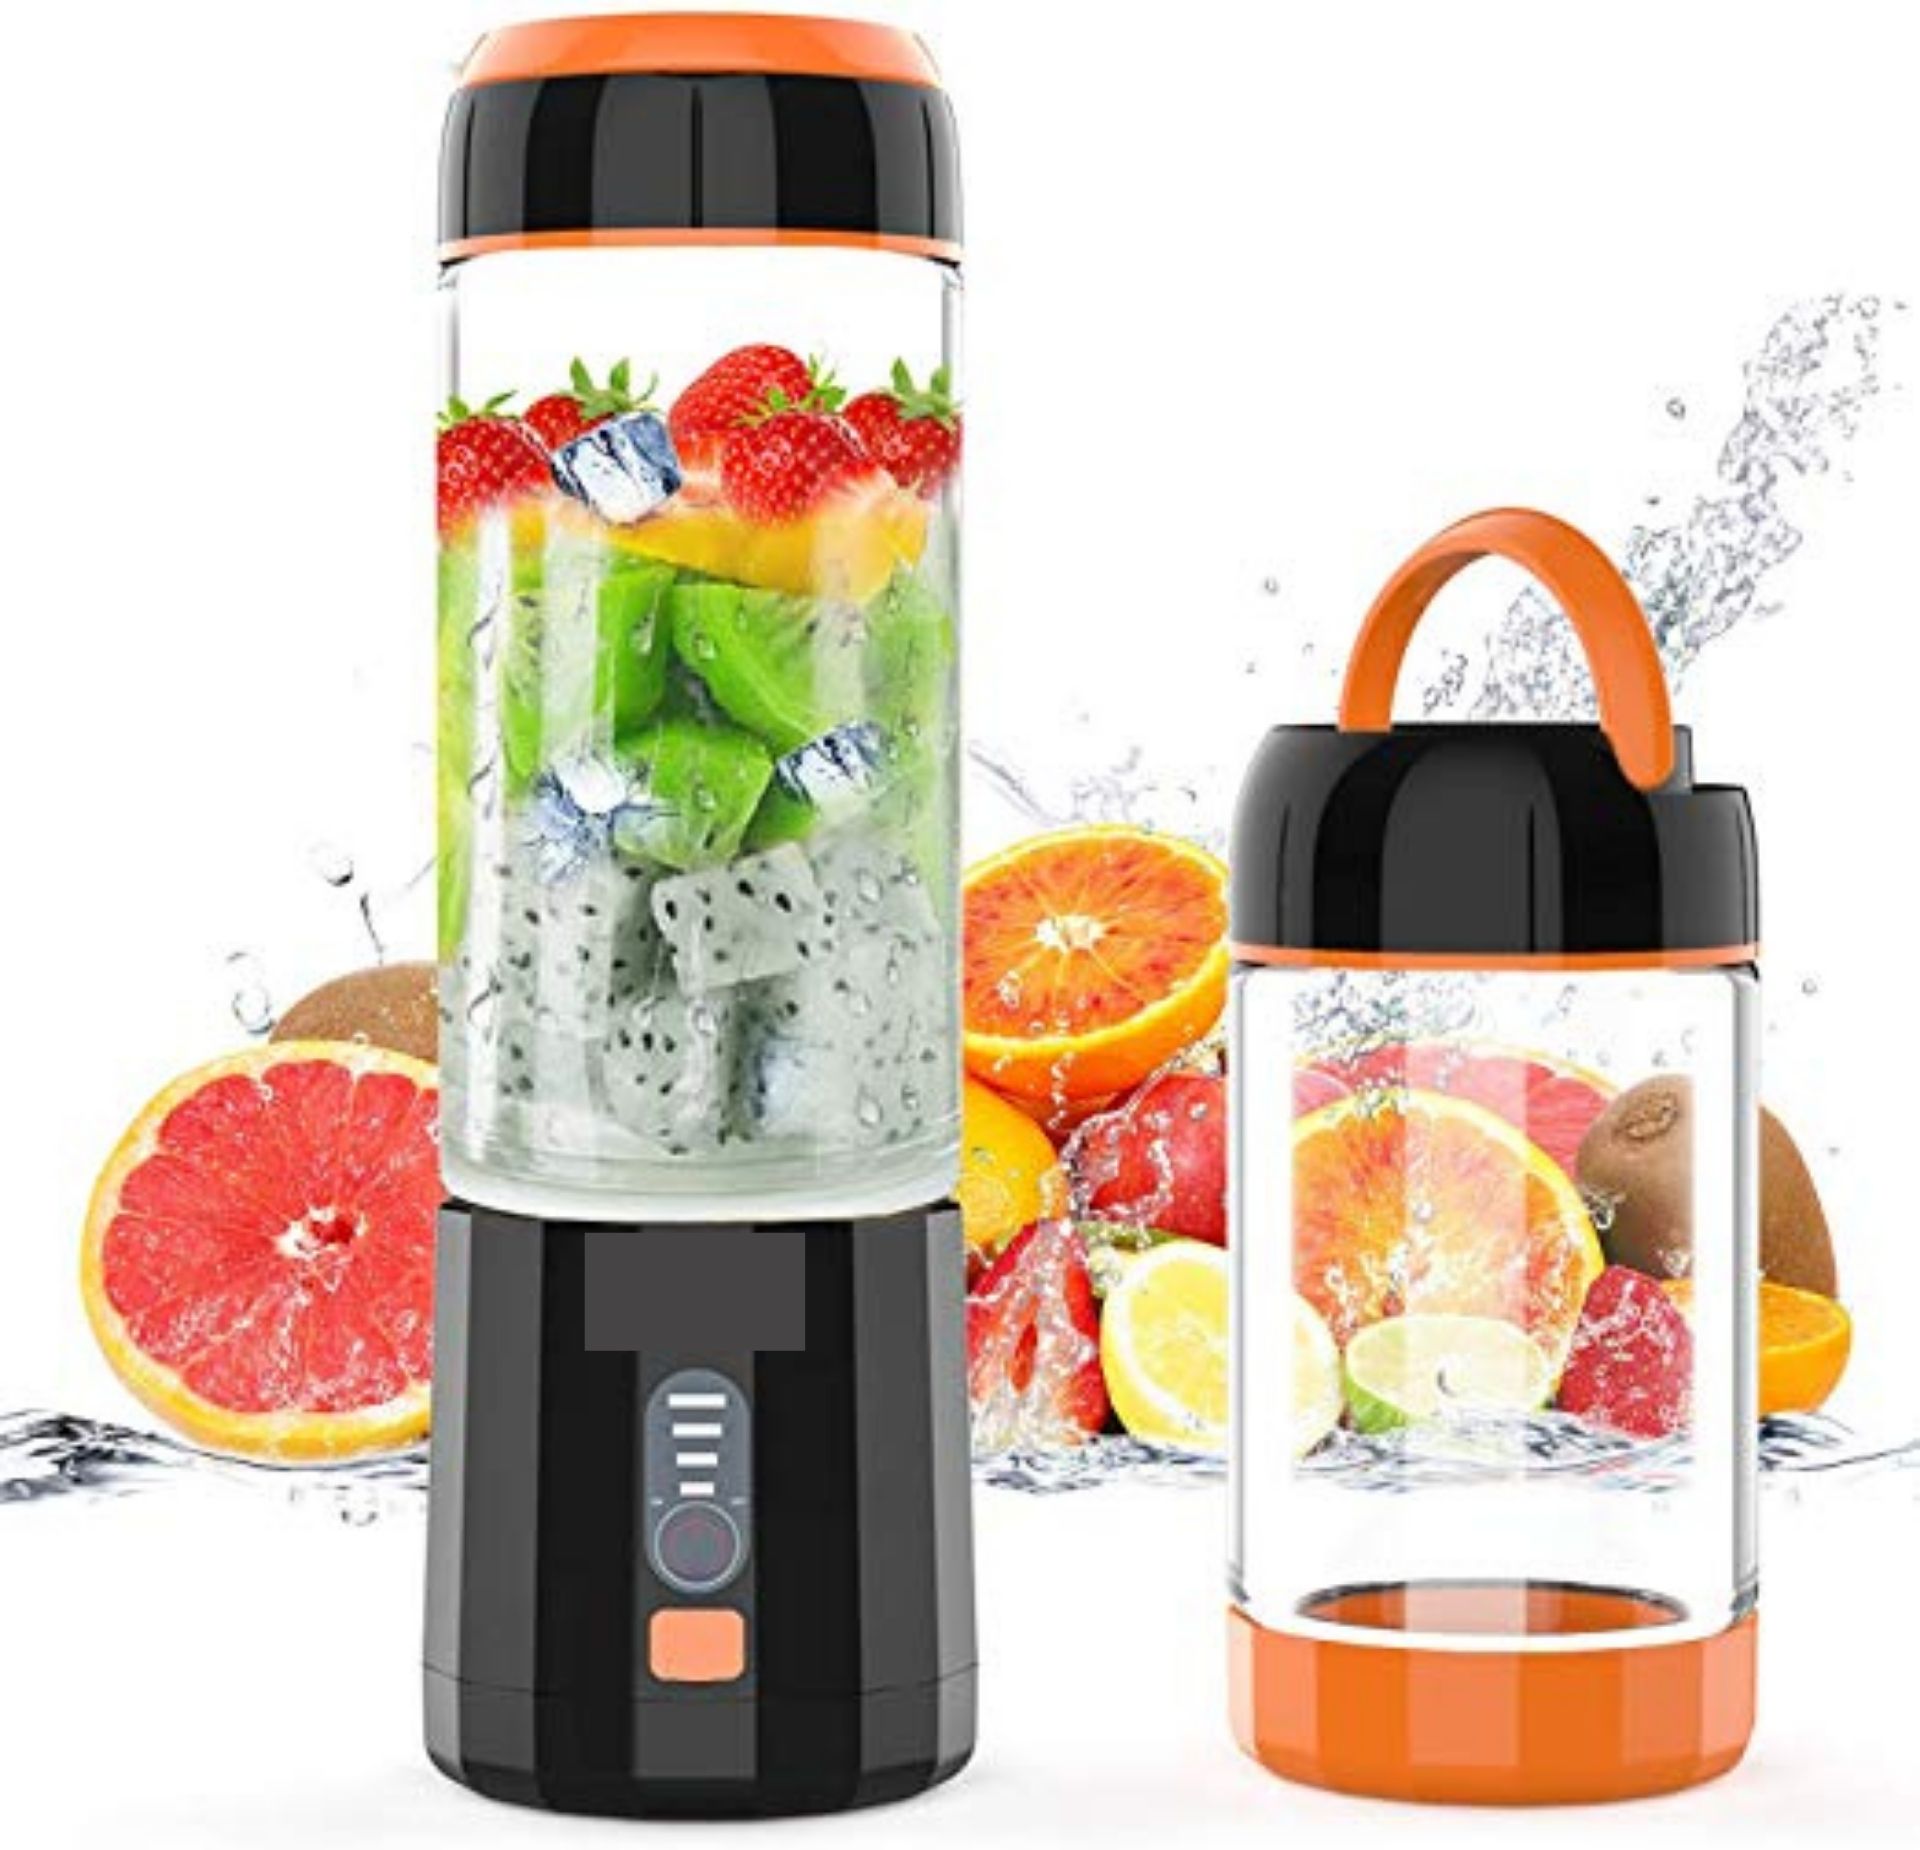 G-Ting Portable Blender Review (2022): Is it Worth Buying? Answered